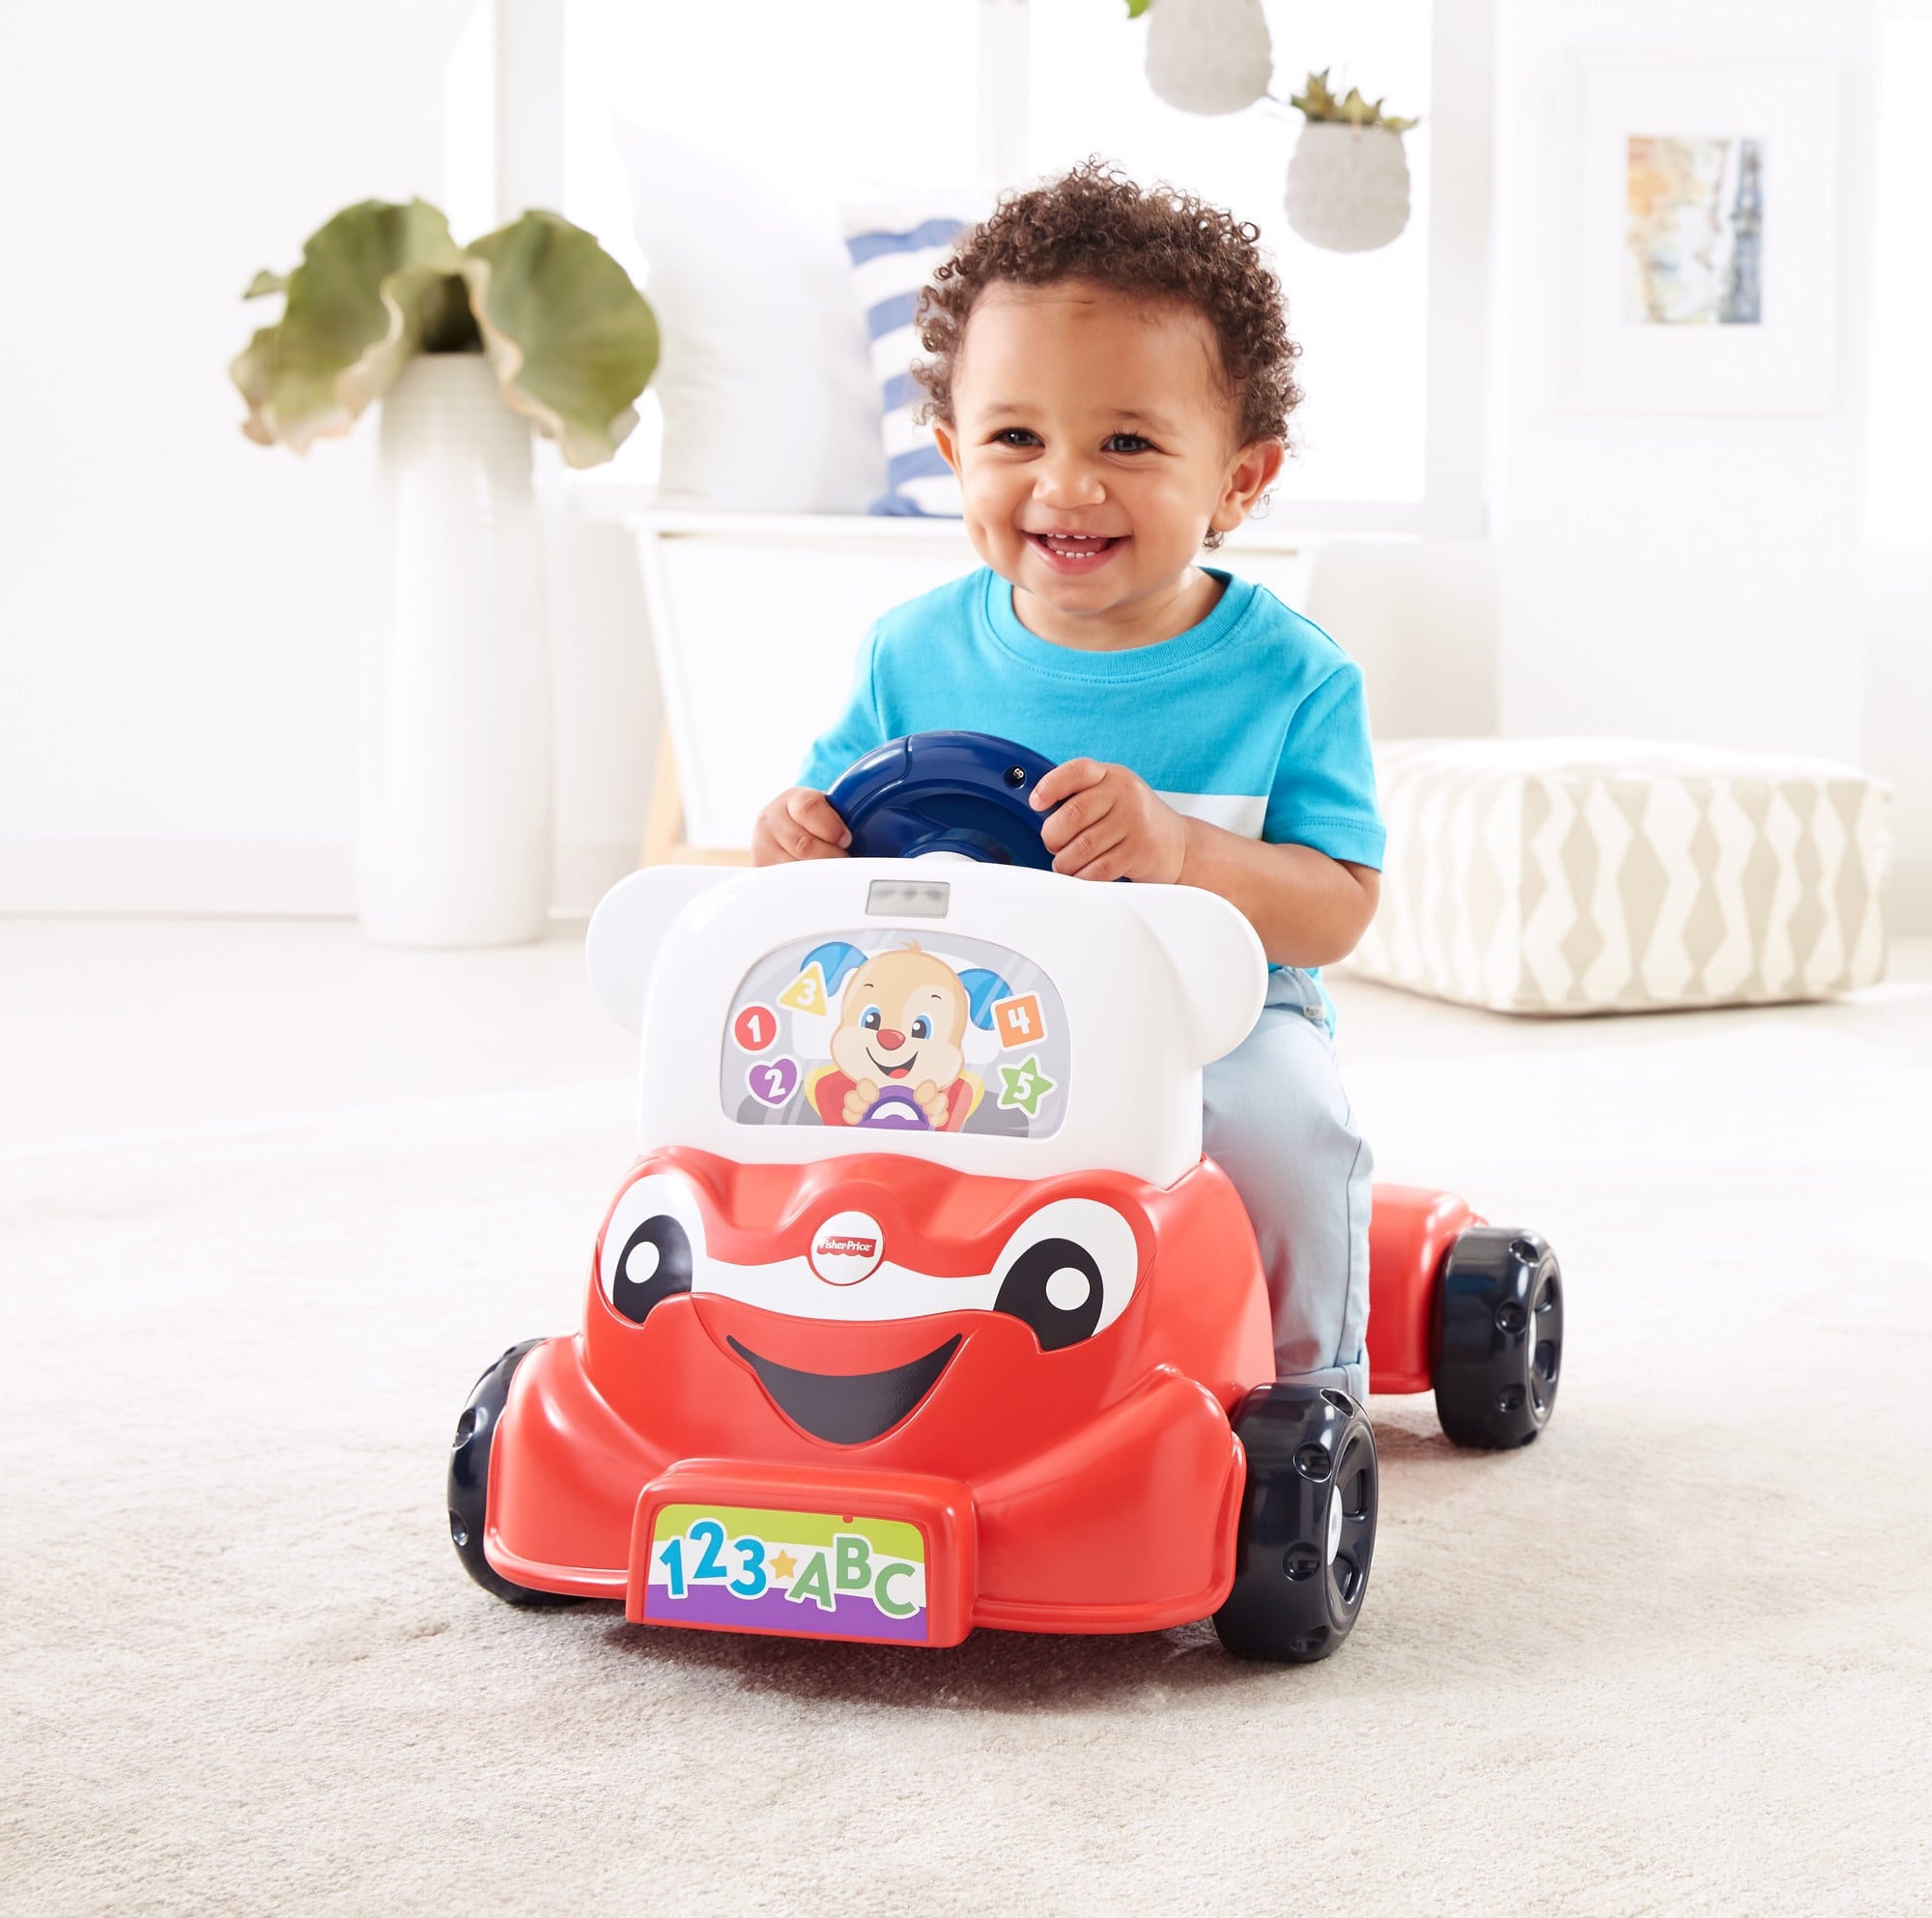 fisher price three in one smart car